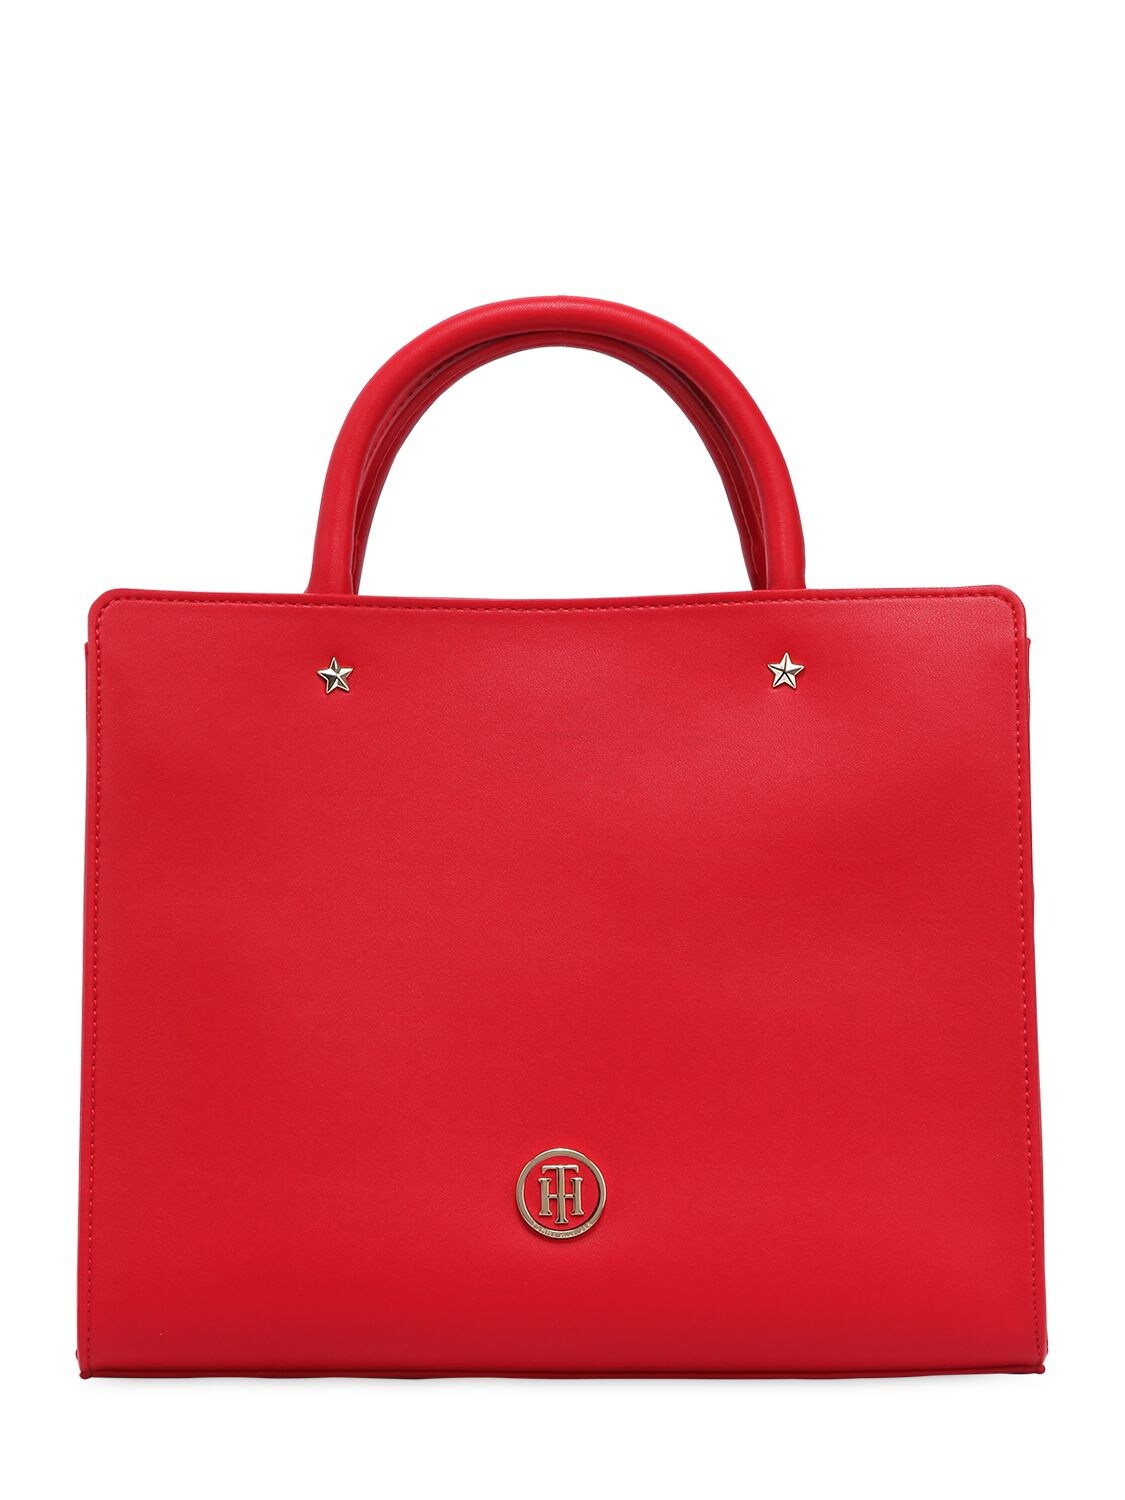 Tommy Hilfiger Saffiano Faux Leather Top Handle Bag In Red